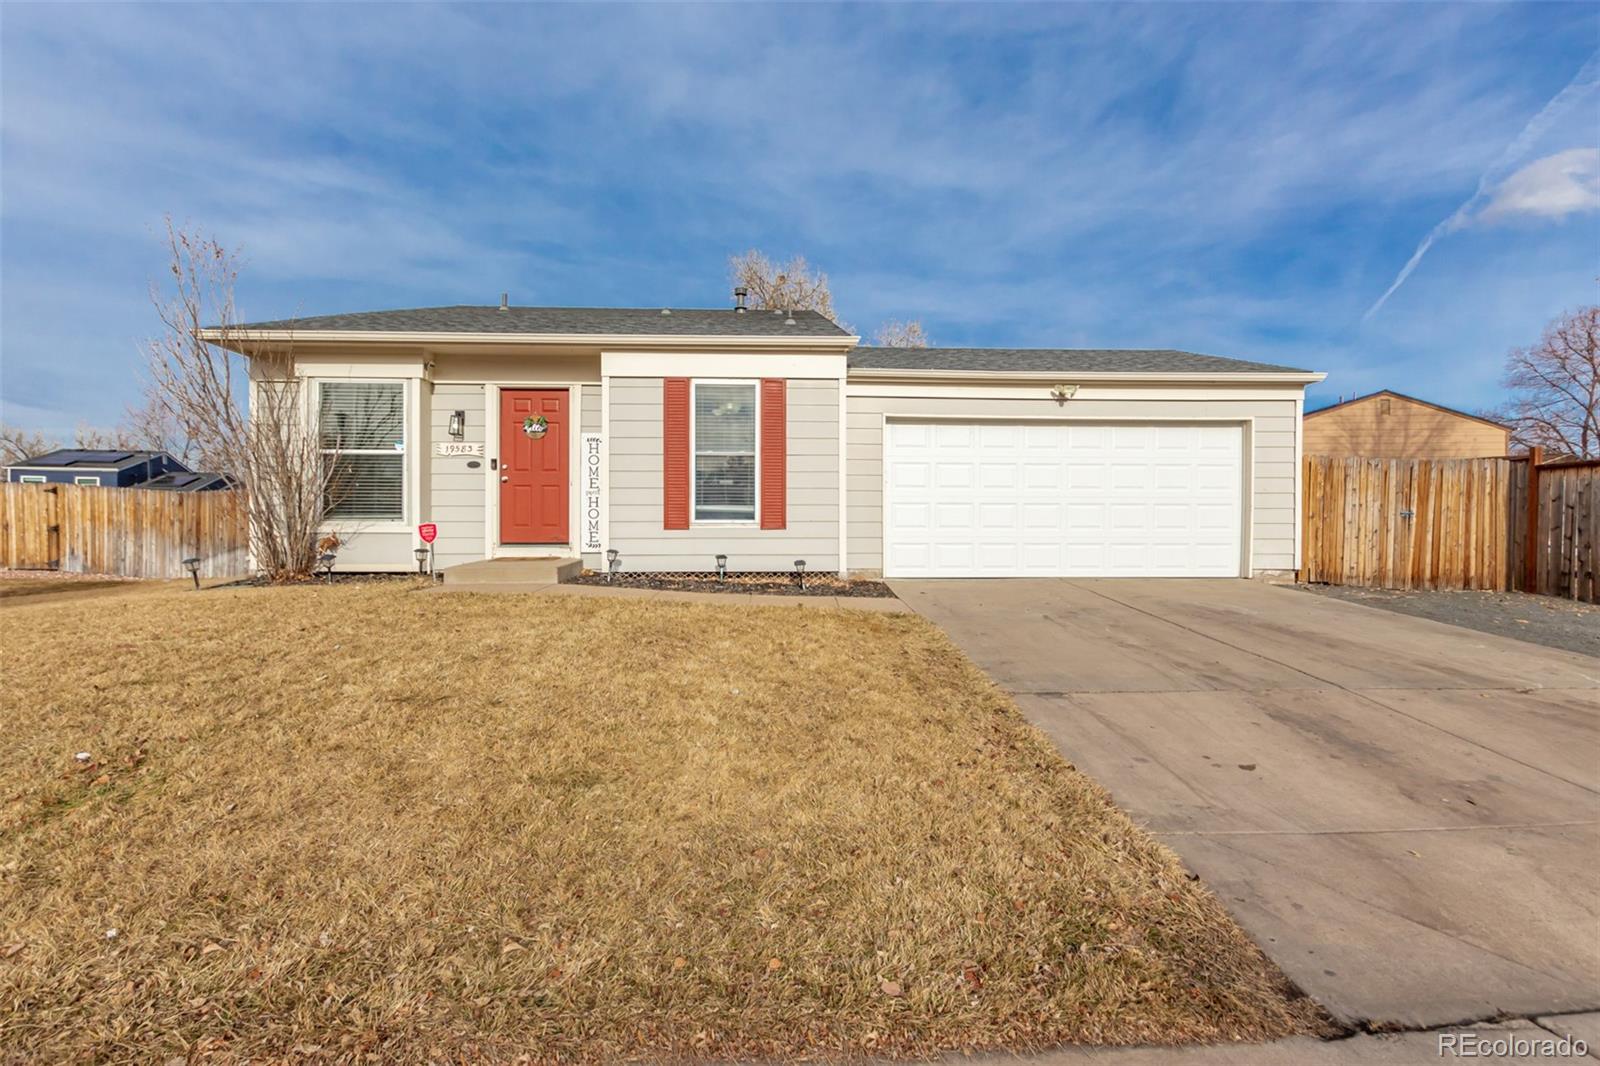 19583 e buchanan place, aurora sold home. Closed on 2024-02-28 for $440,000.